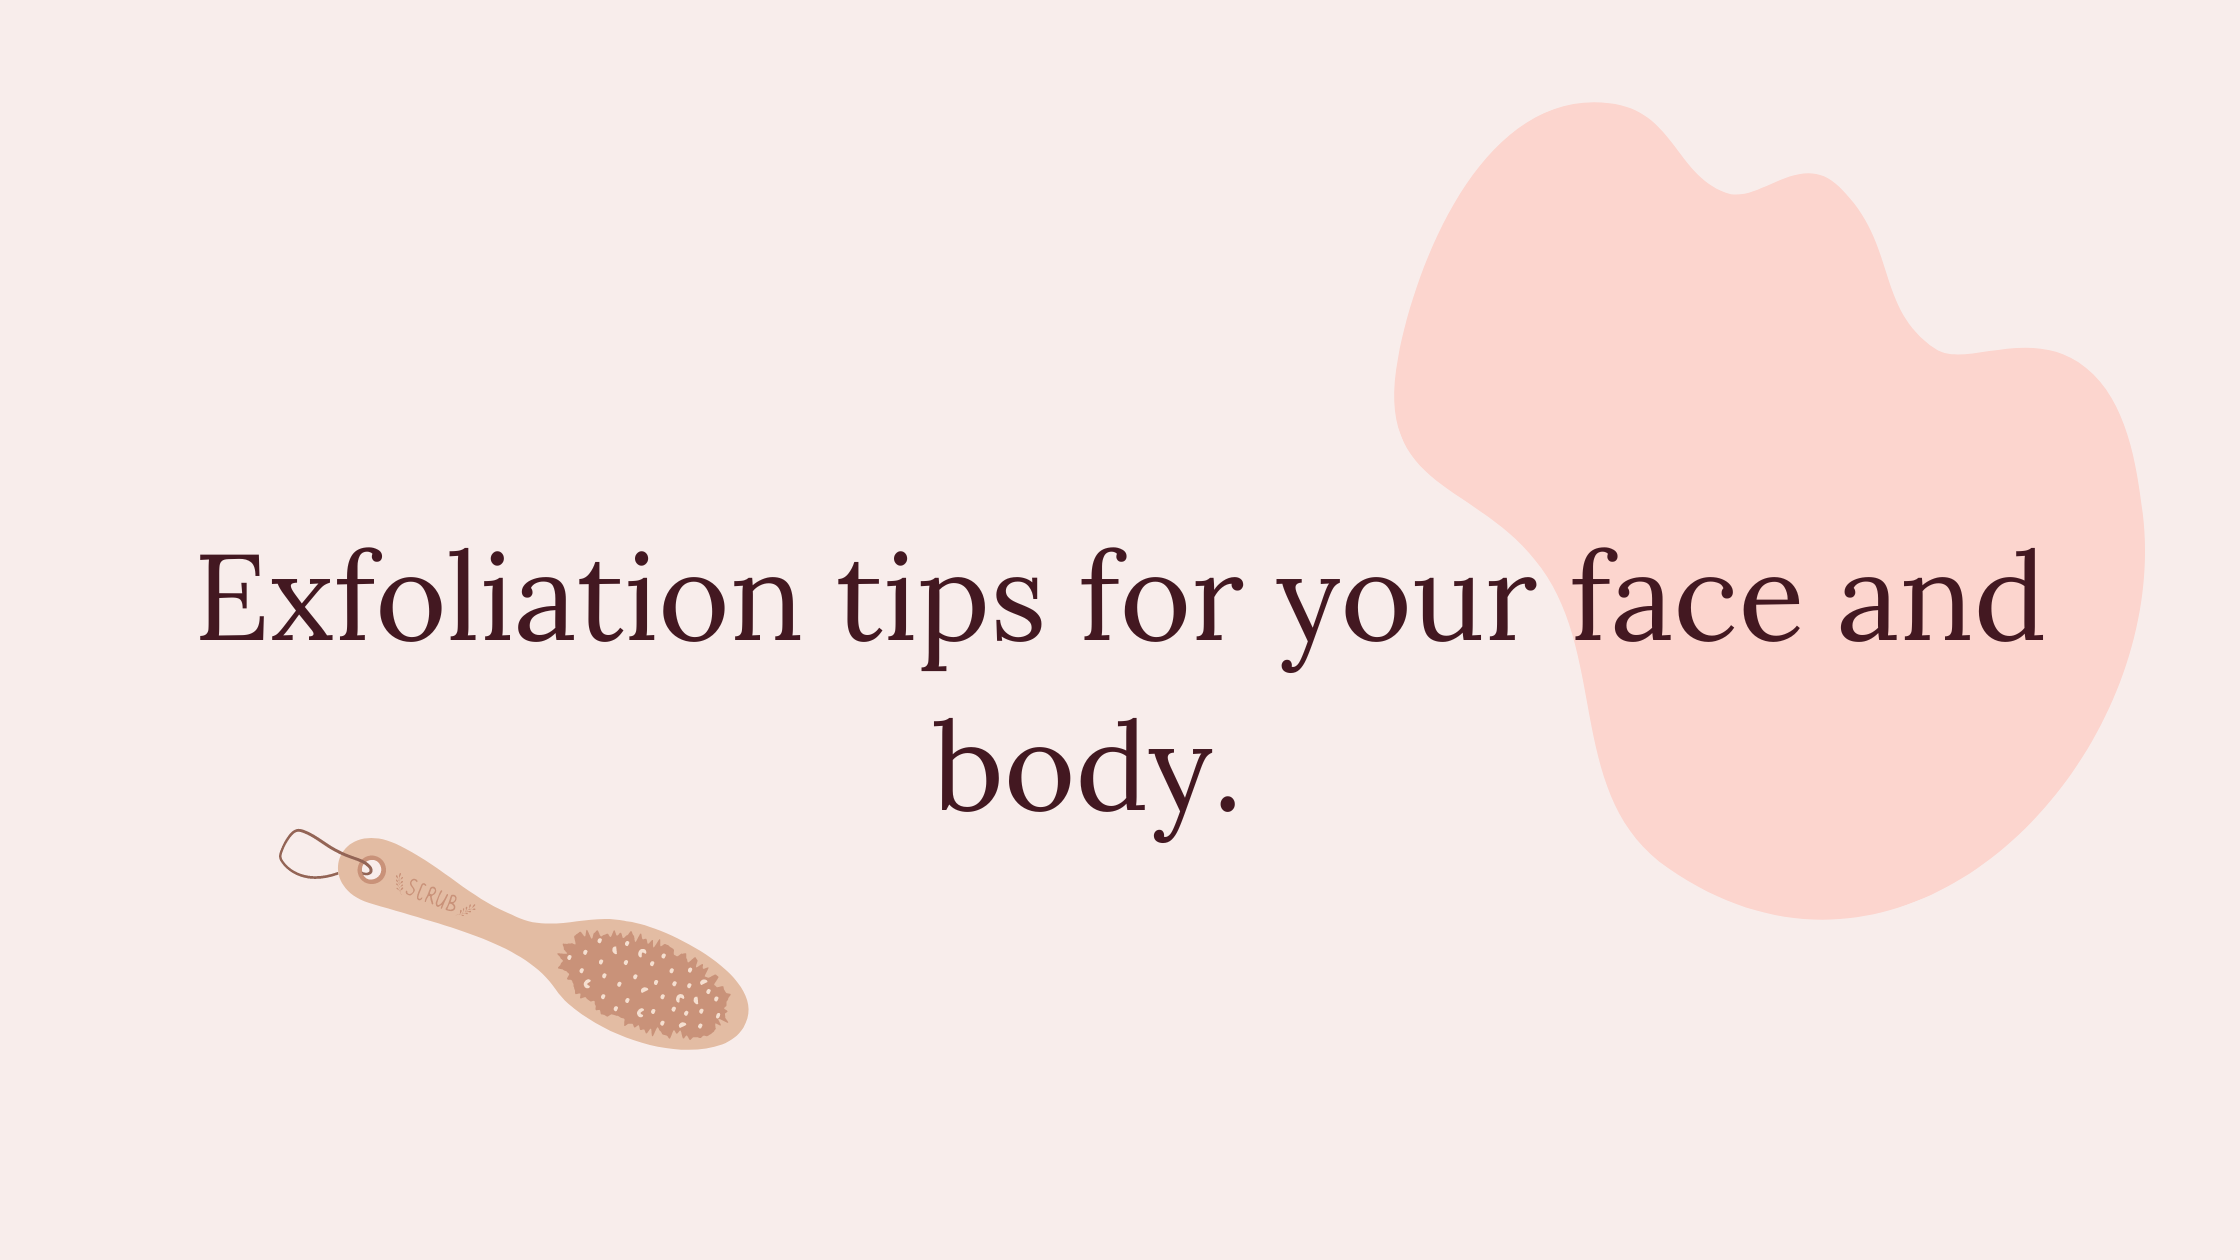 How to exfoliate your face and body